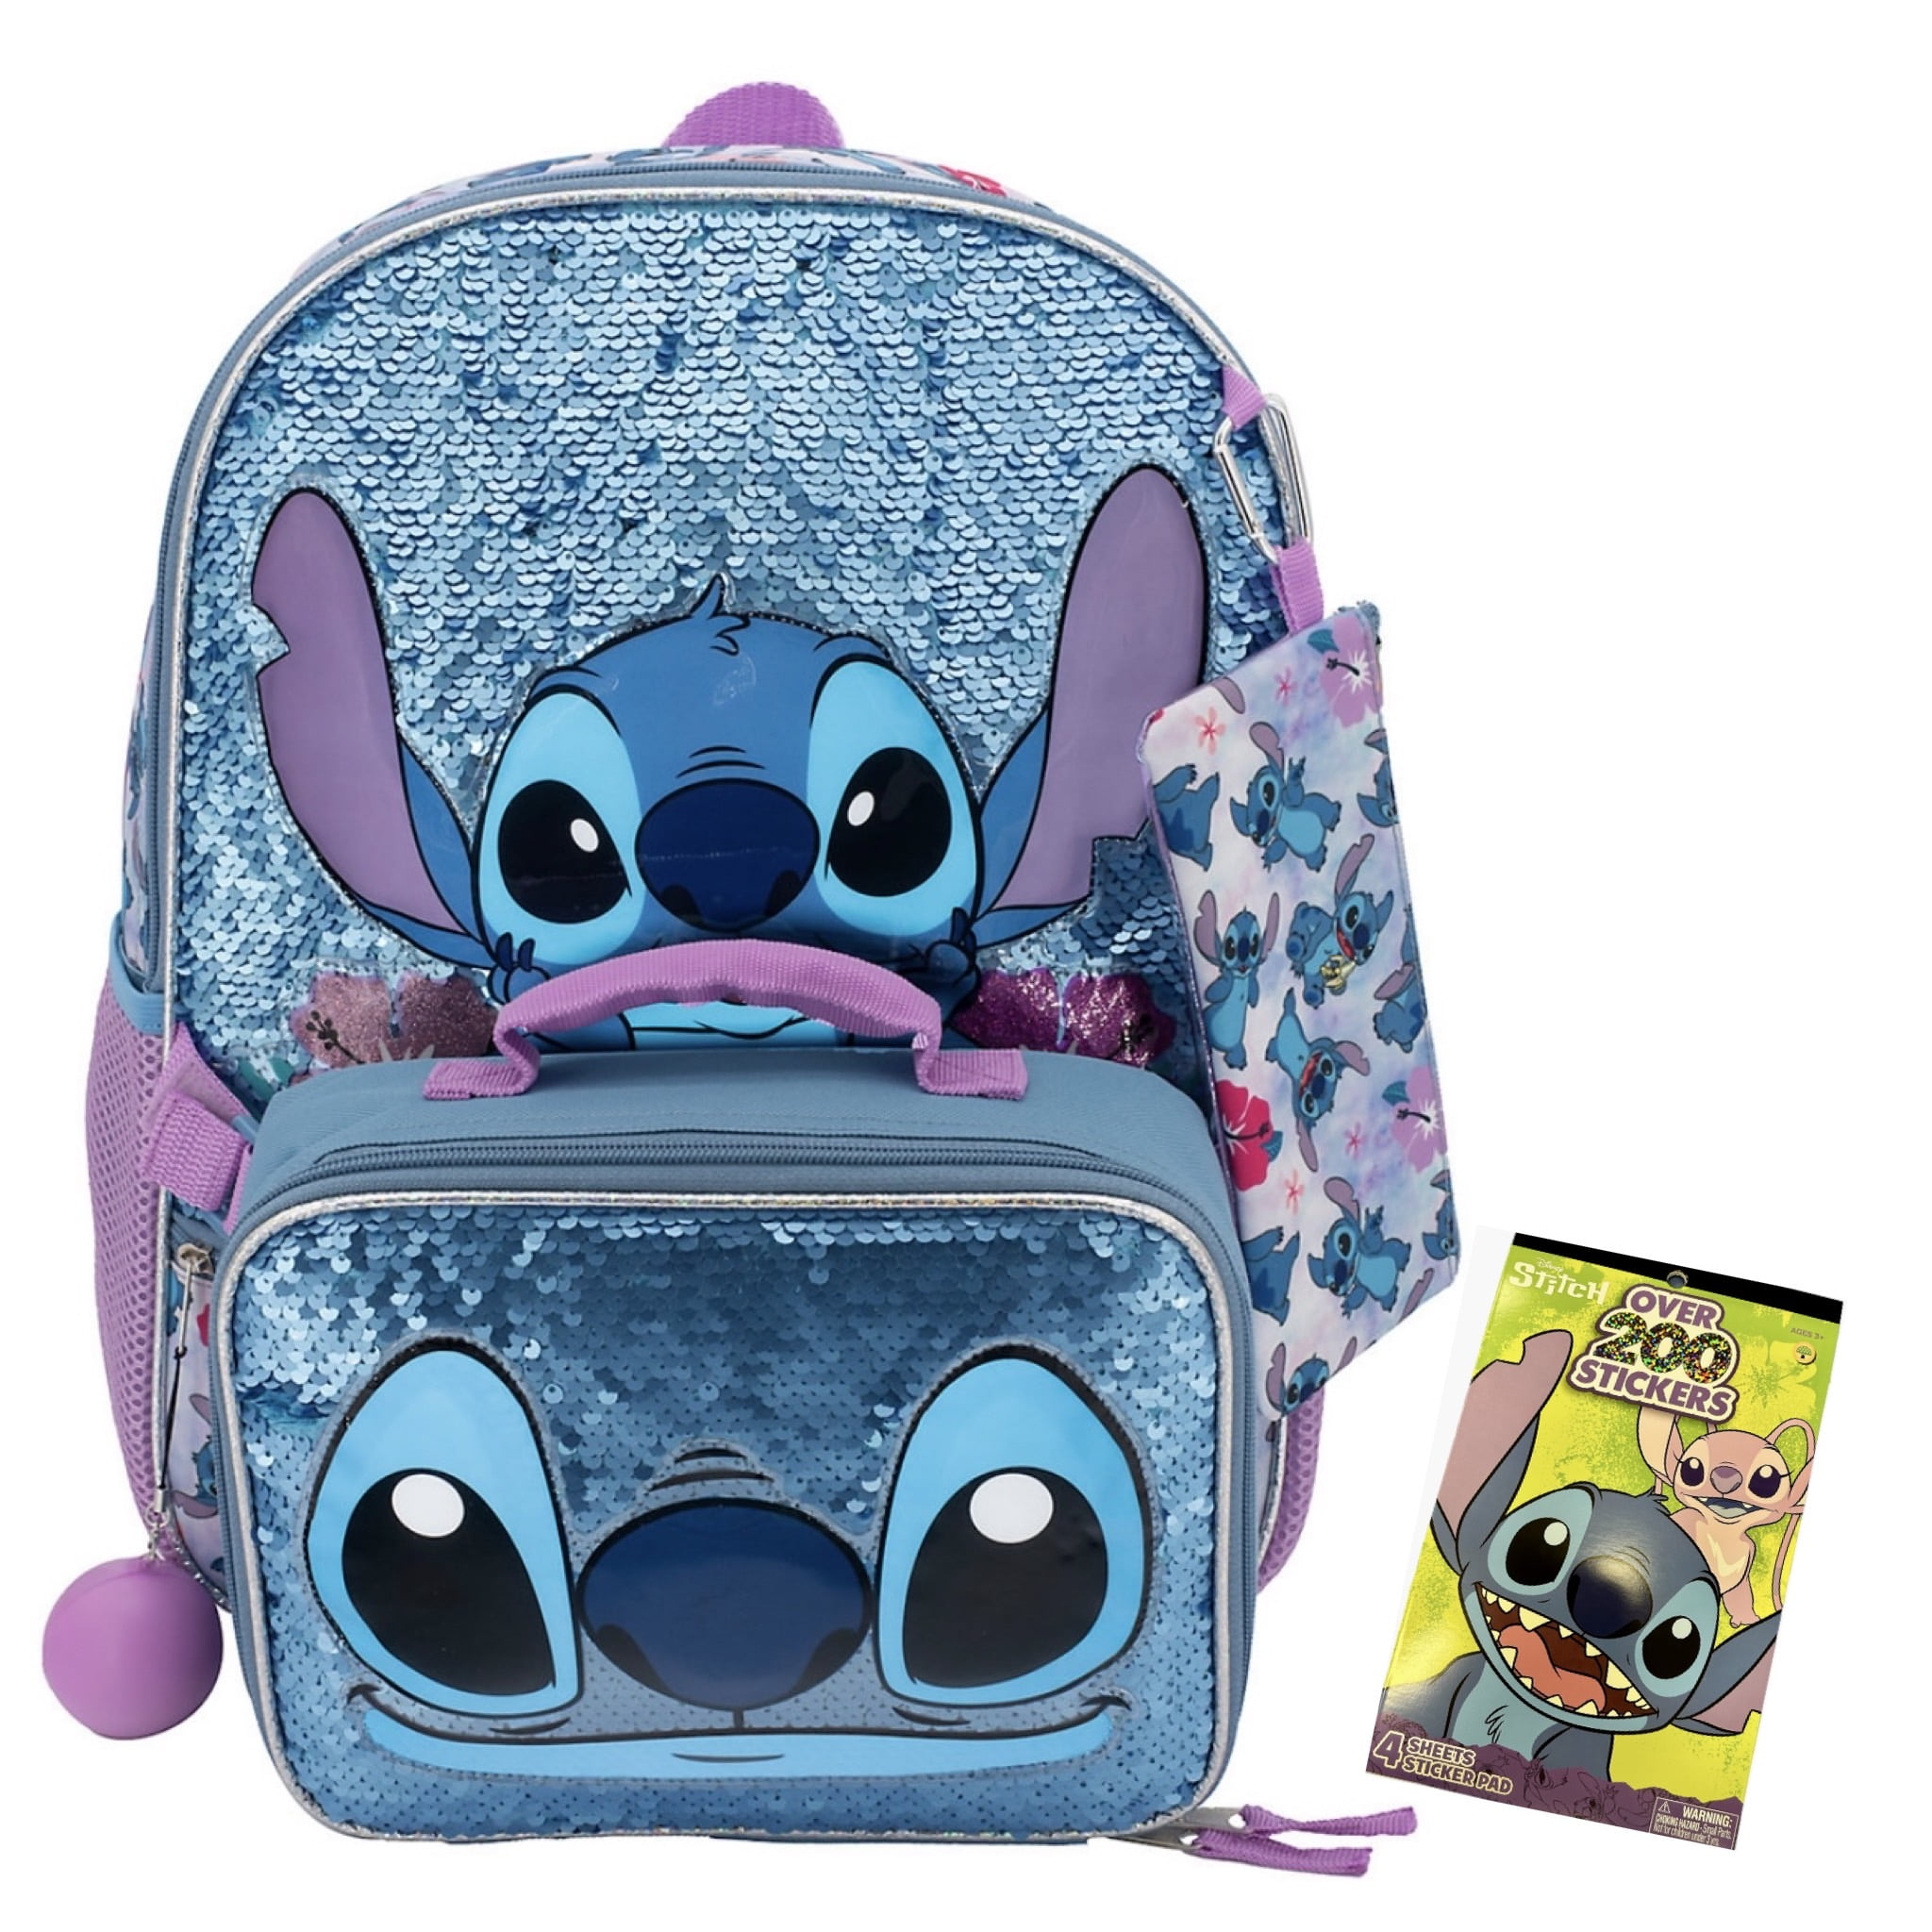 Disney Lilo and Stitch Sequin Backpack 6 Piece Set with Lunch Bag Gadget  Pencil Case Fidget Ball Carabineer and Stickers 